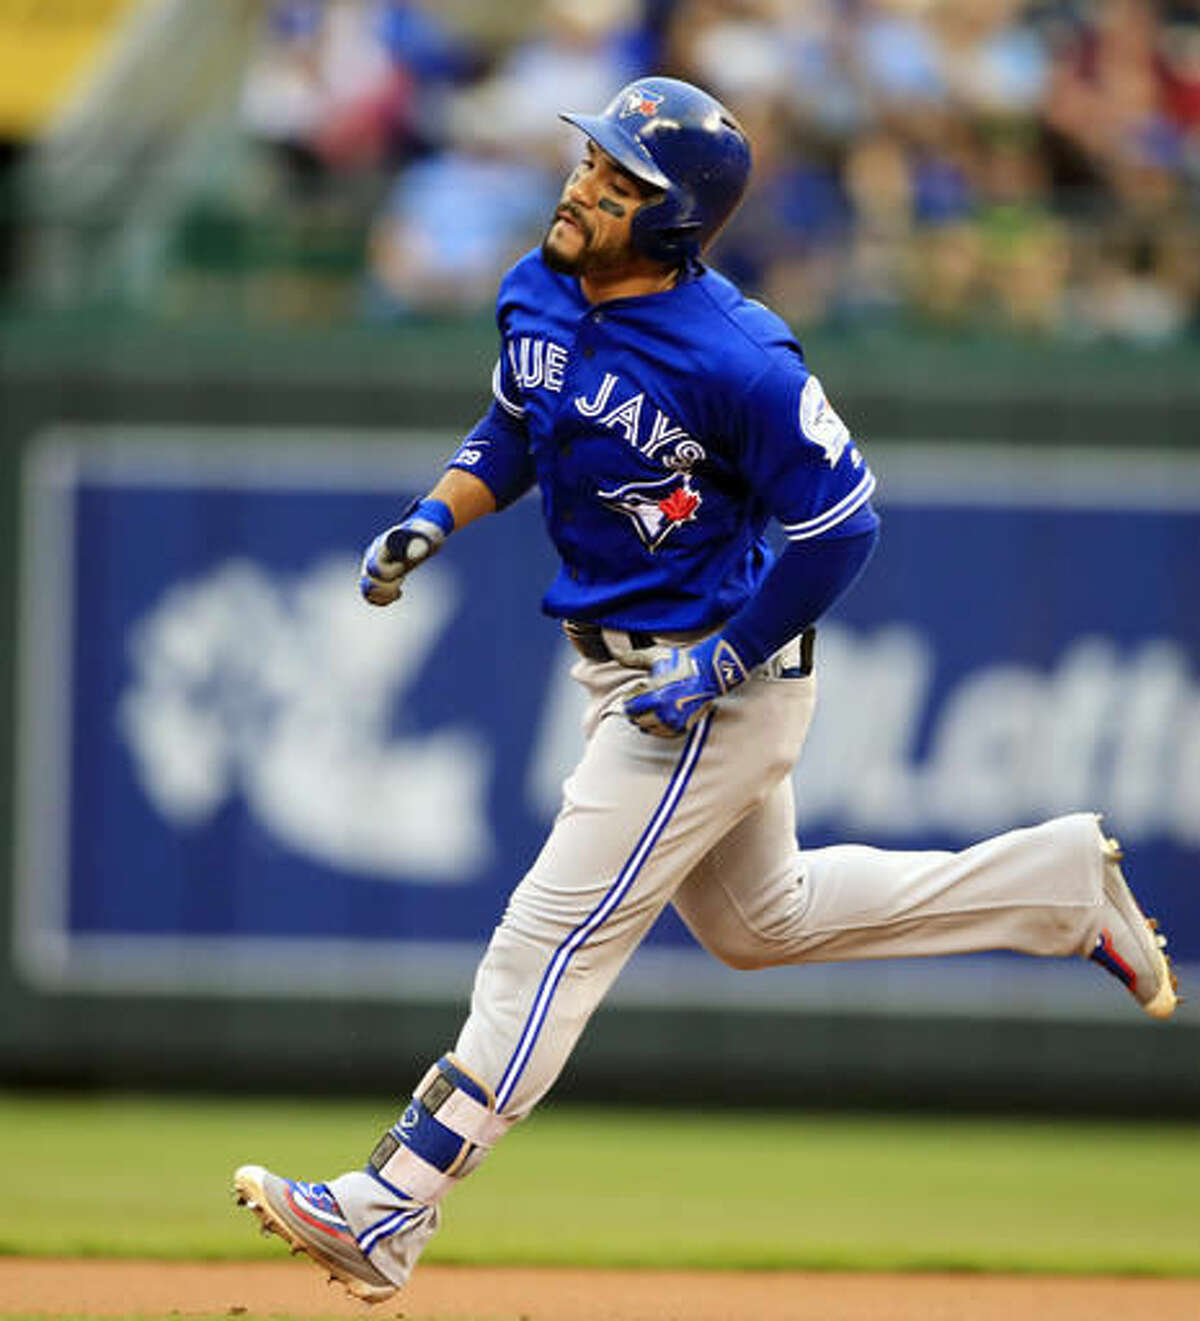 Toronto Blue Jays' Devon Travis rounds the bases after hitting a solo home run off Kansas City Royals relief pitcher Dillon Gee during the first inning of a baseball game at Kauffman Stadium in Kansas City, Mo., Friday, Aug. 5, 2016. (AP Photo/Orlin Wagner)